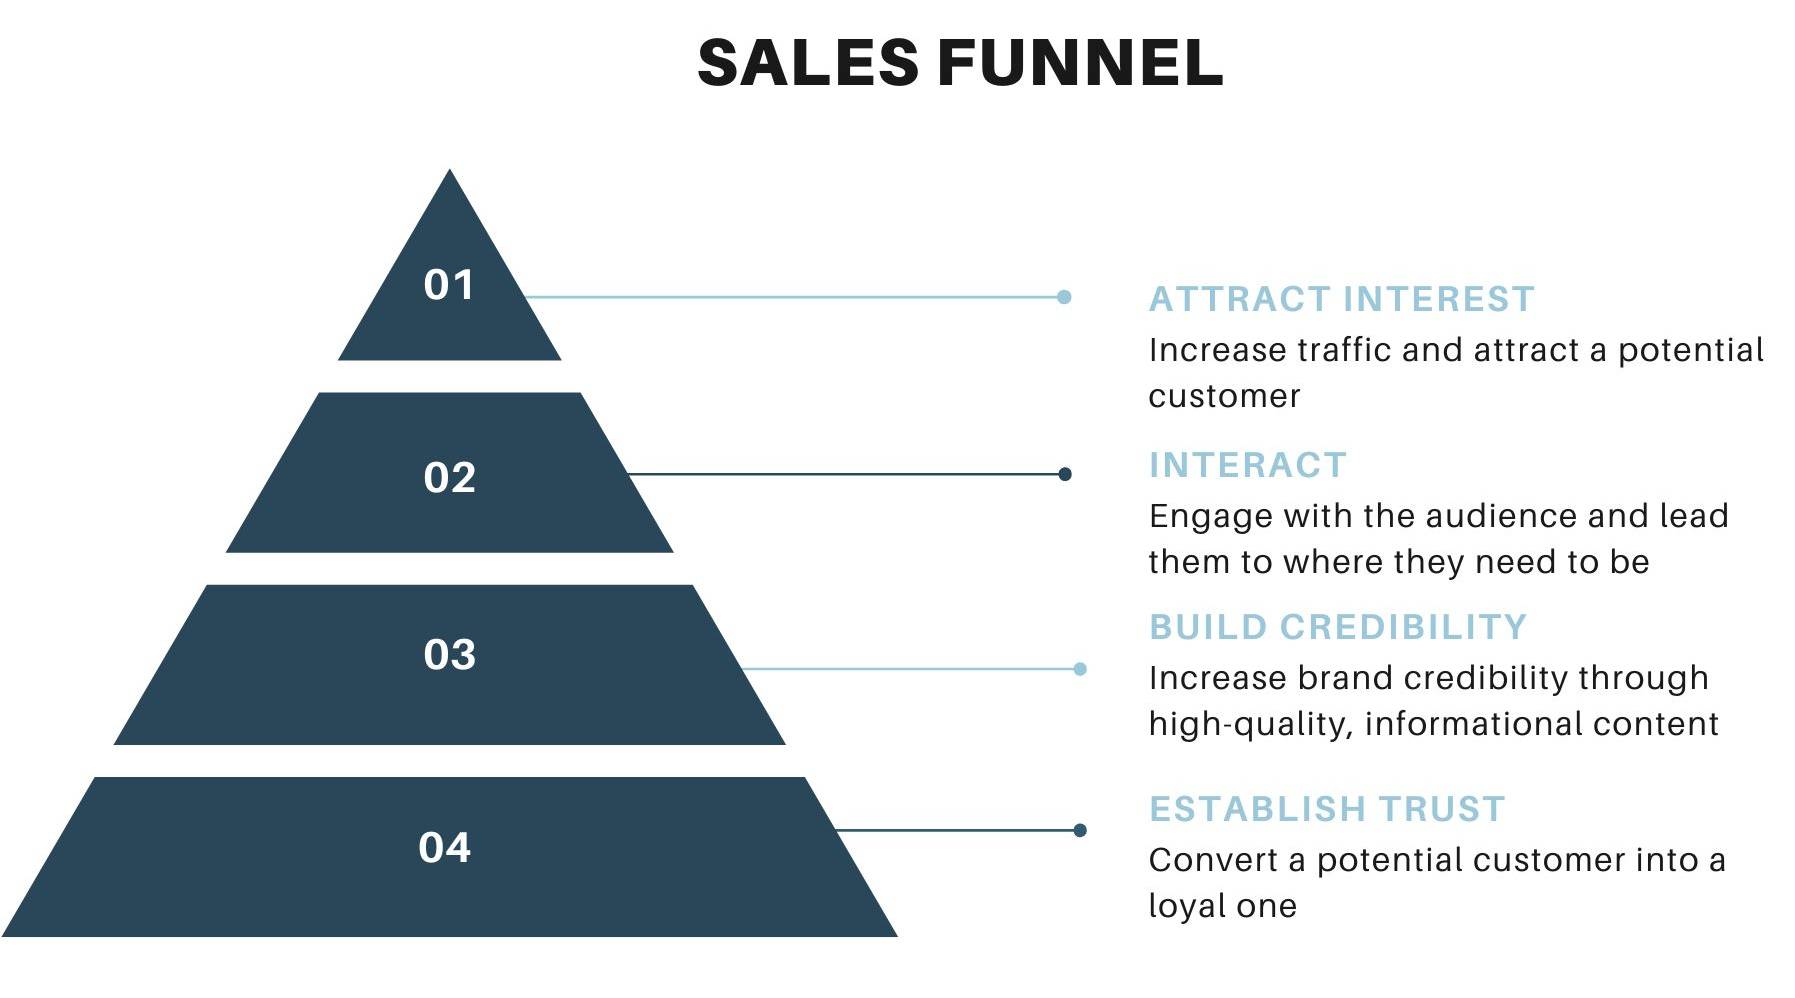 Sales funnel showing content marketing goals